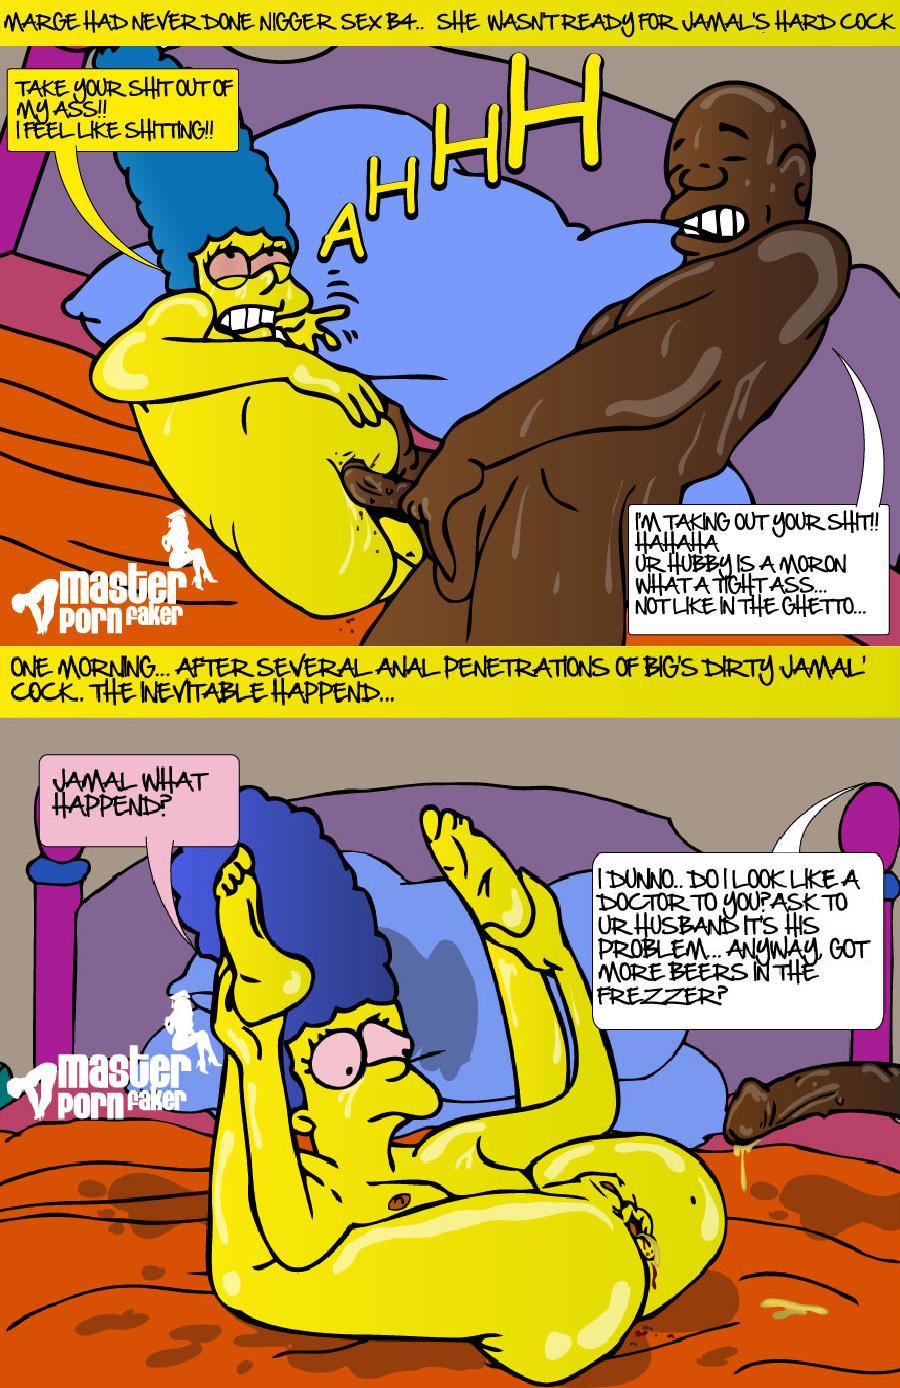 Pic581881 Marge Simpson The Simpsons Master Porn Faker Simpsons Porn